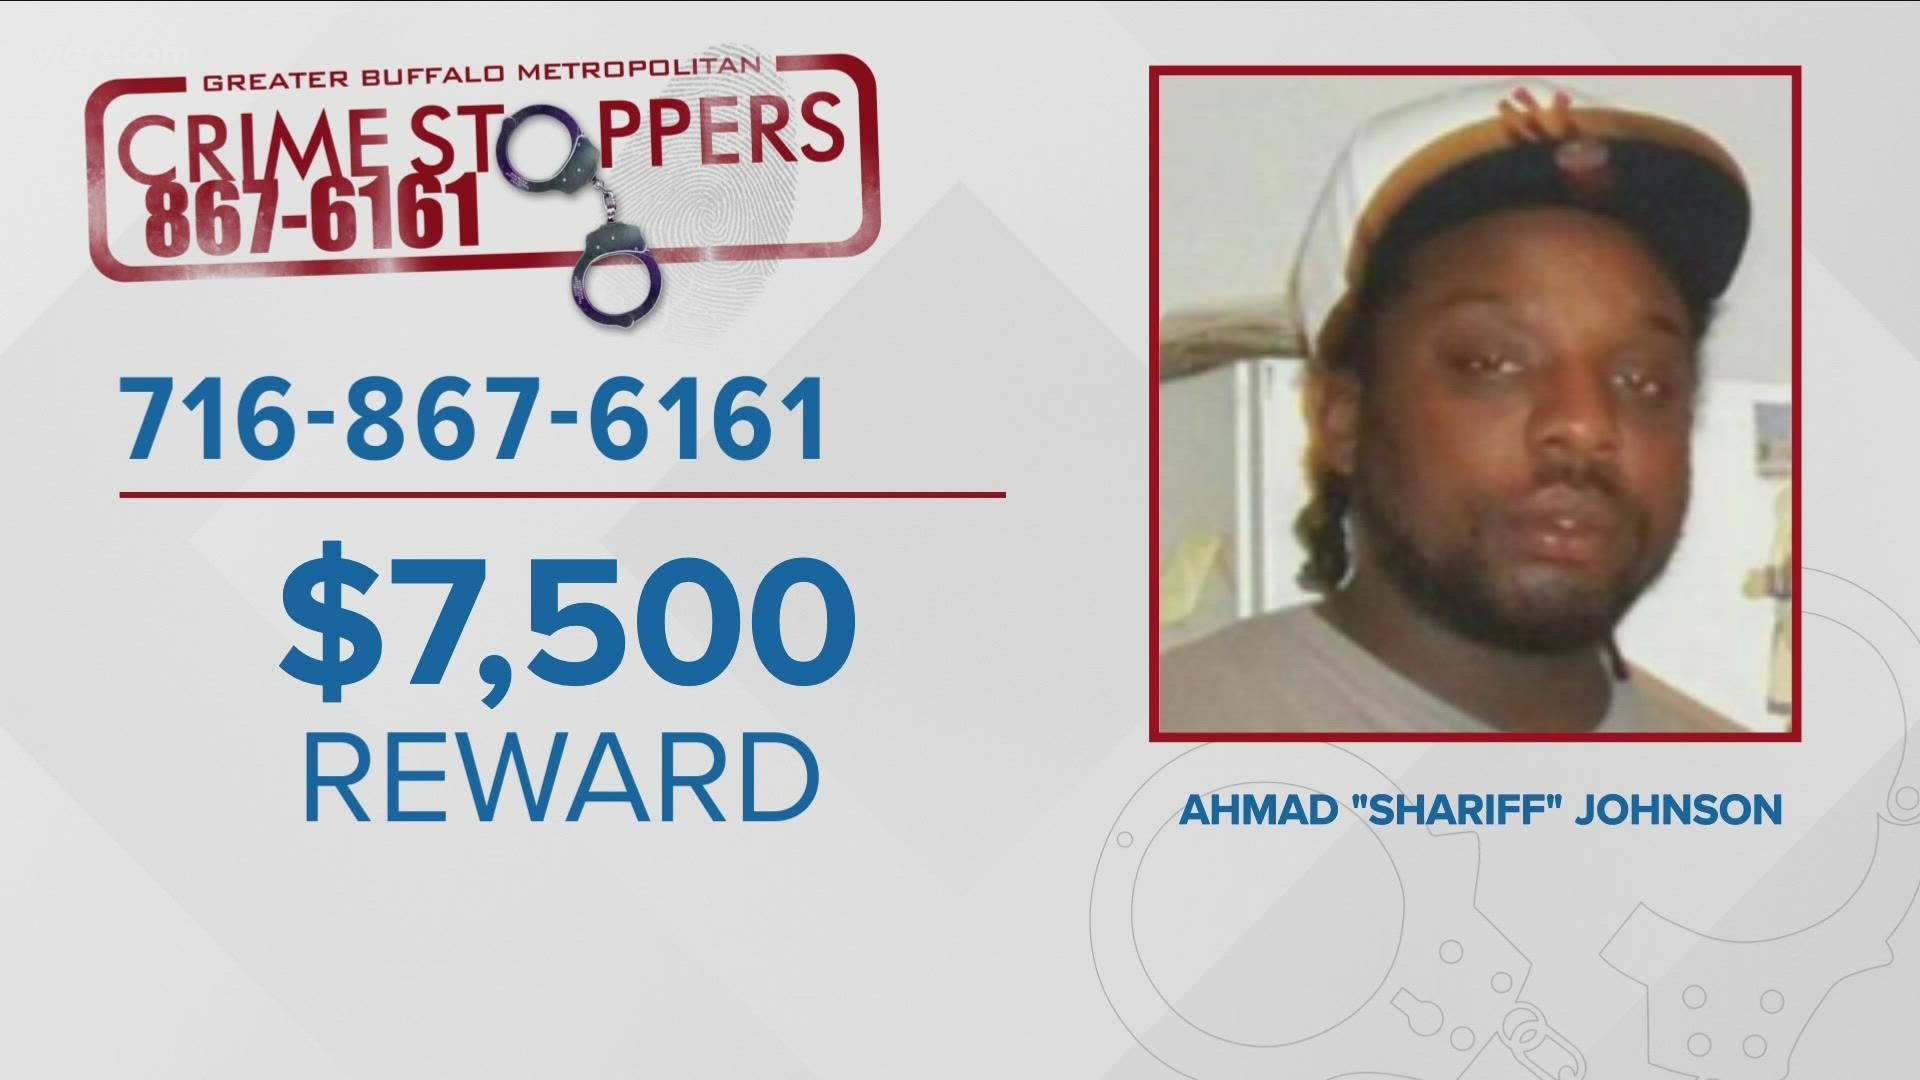 Crime stoppers of Western New York is offering a $7,500 reward for information leading to an arrest in a March homicide.